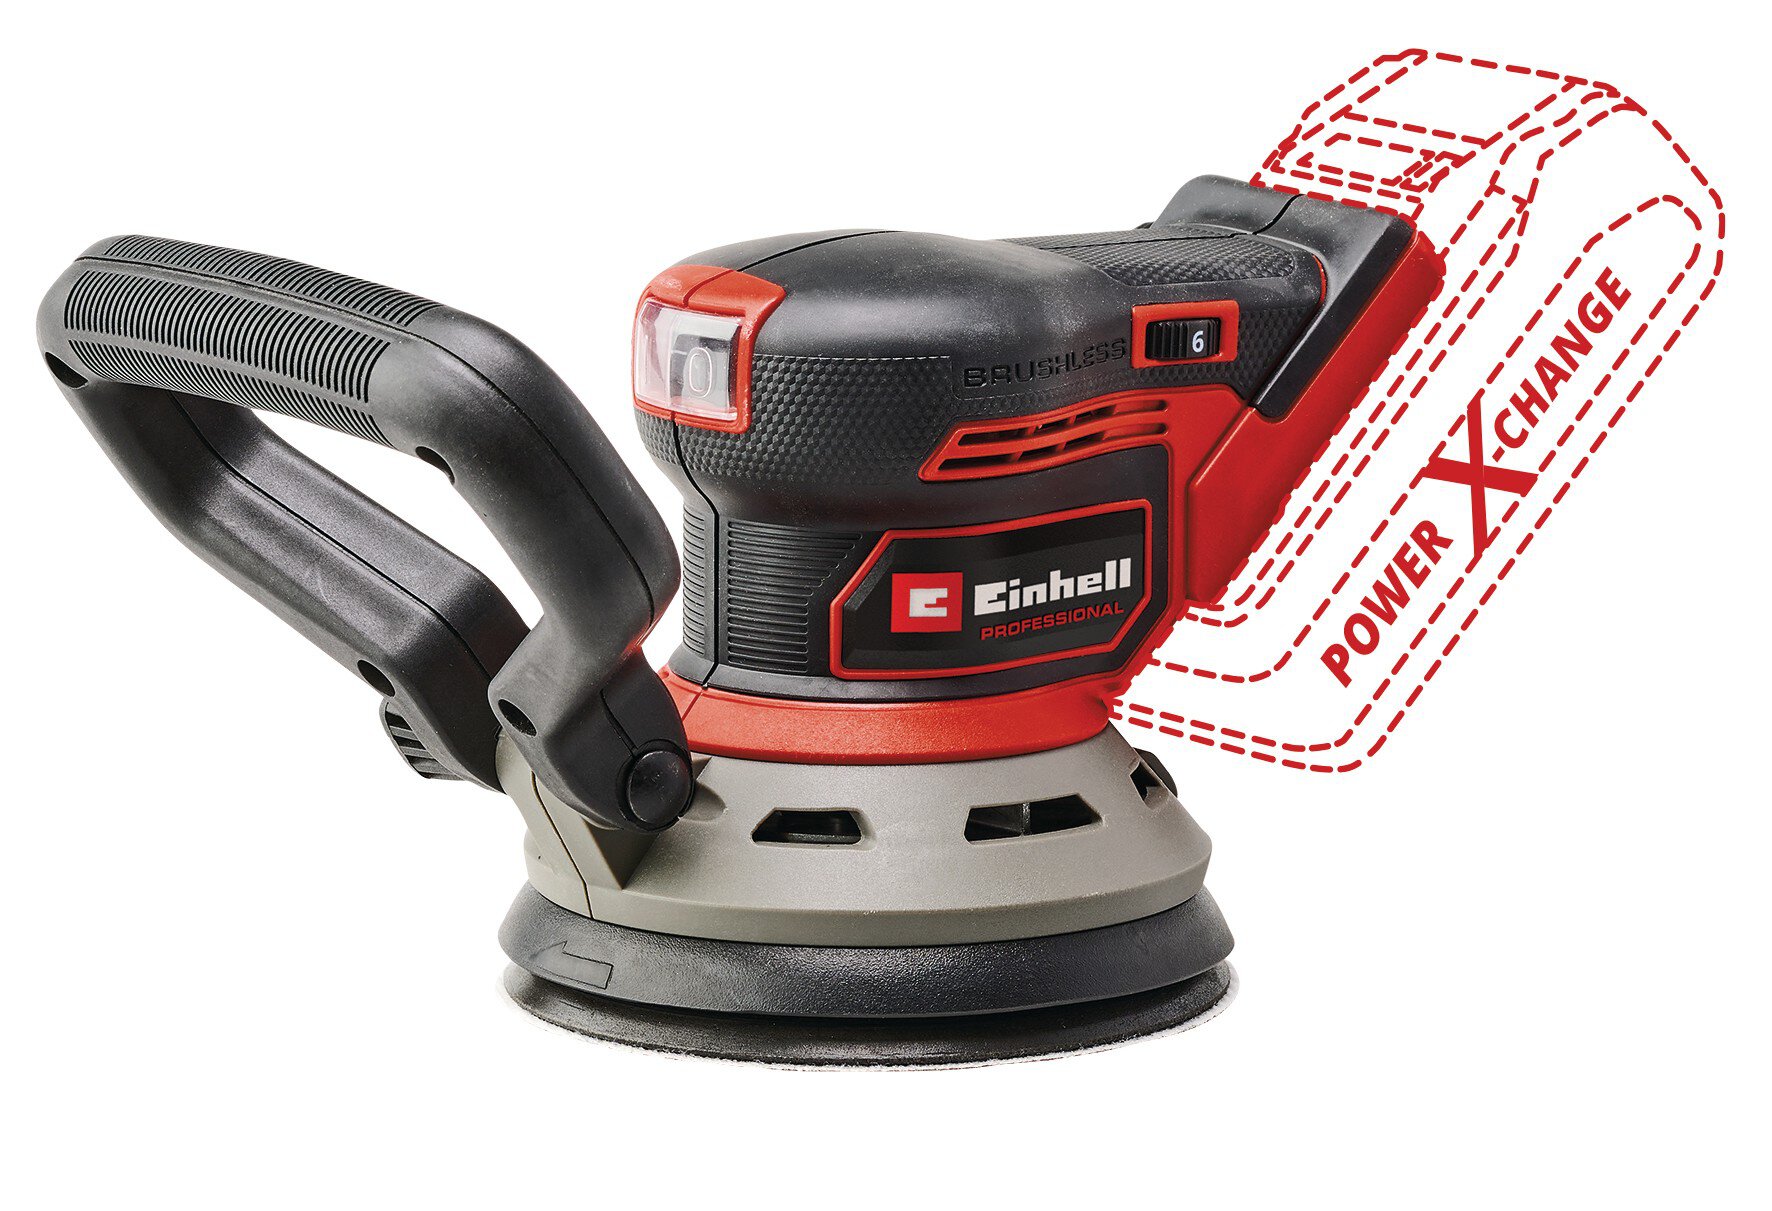 einhell-professional-cordless-rotating-sander-4462020-productimage-102